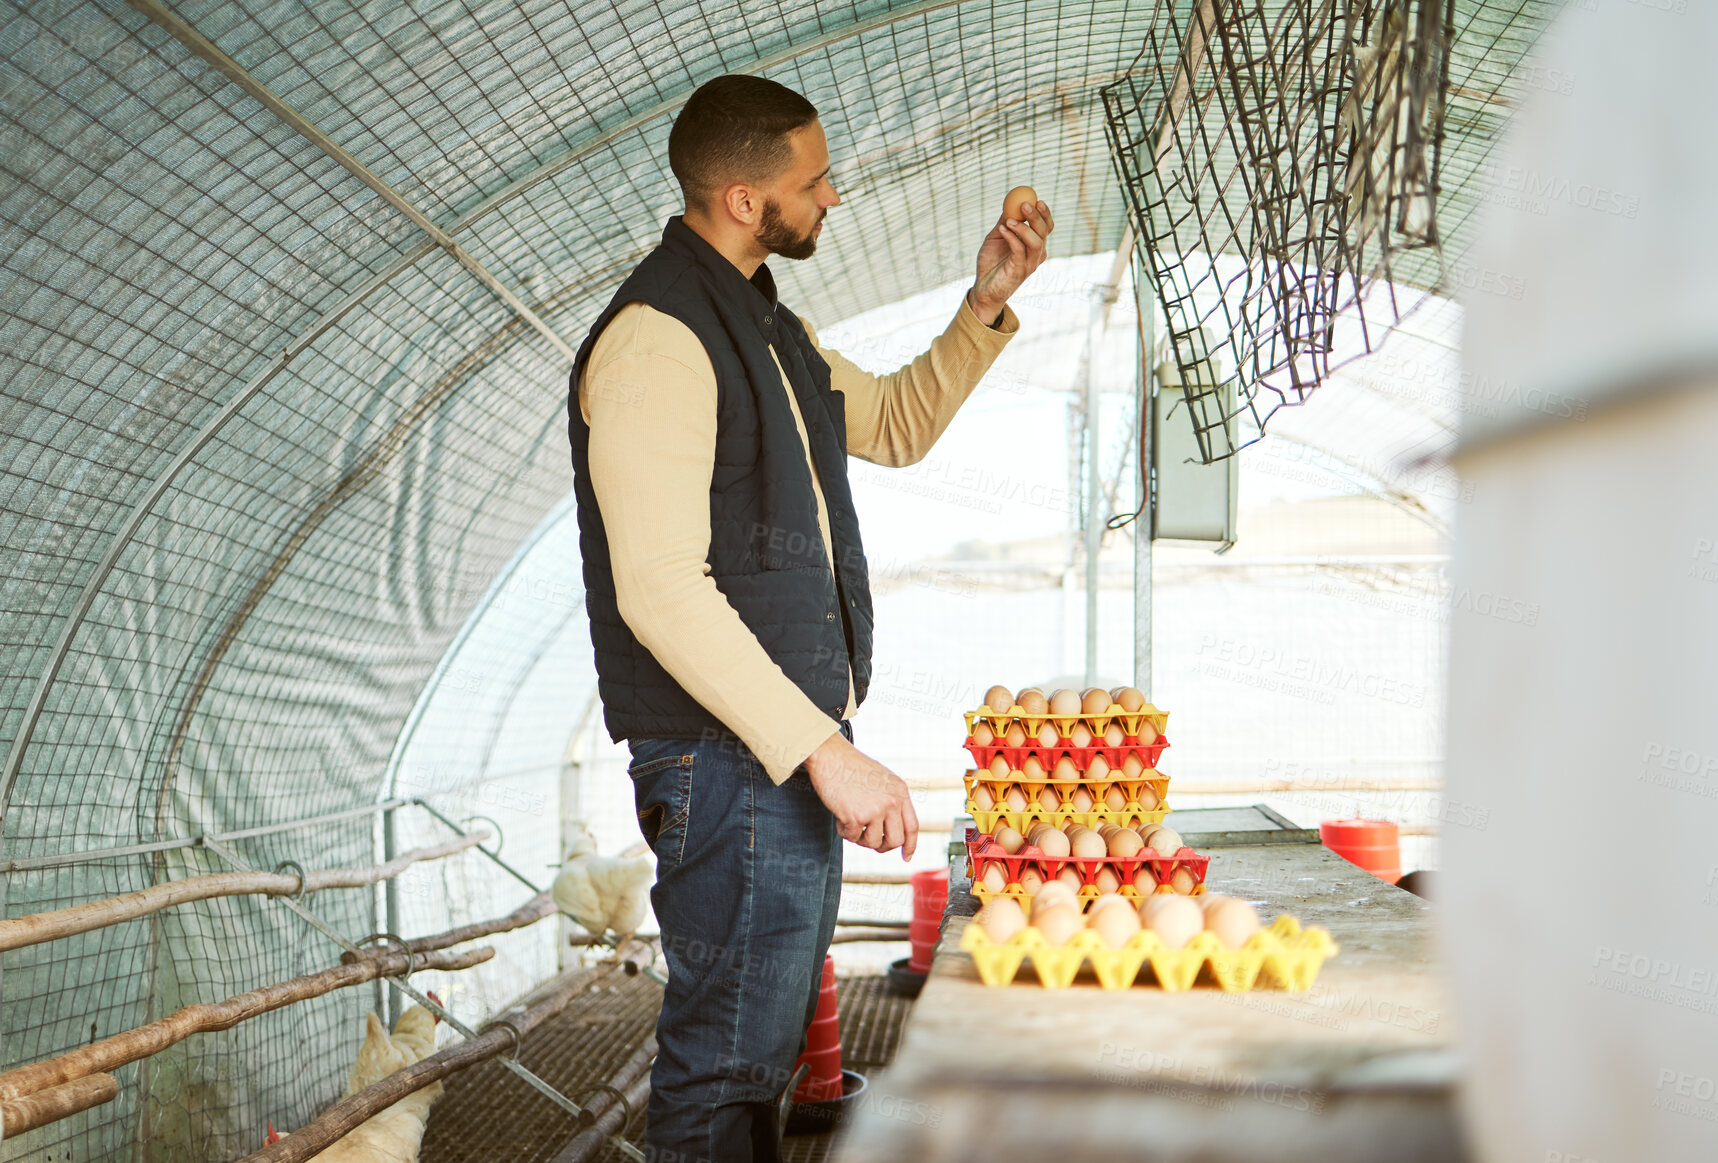 Buy stock photo Man, tray or chicken eggs check in food industry sales, logistics export orders or quality control management on countryside farming coop. Farmer, poultry birds or protein production stock for retail